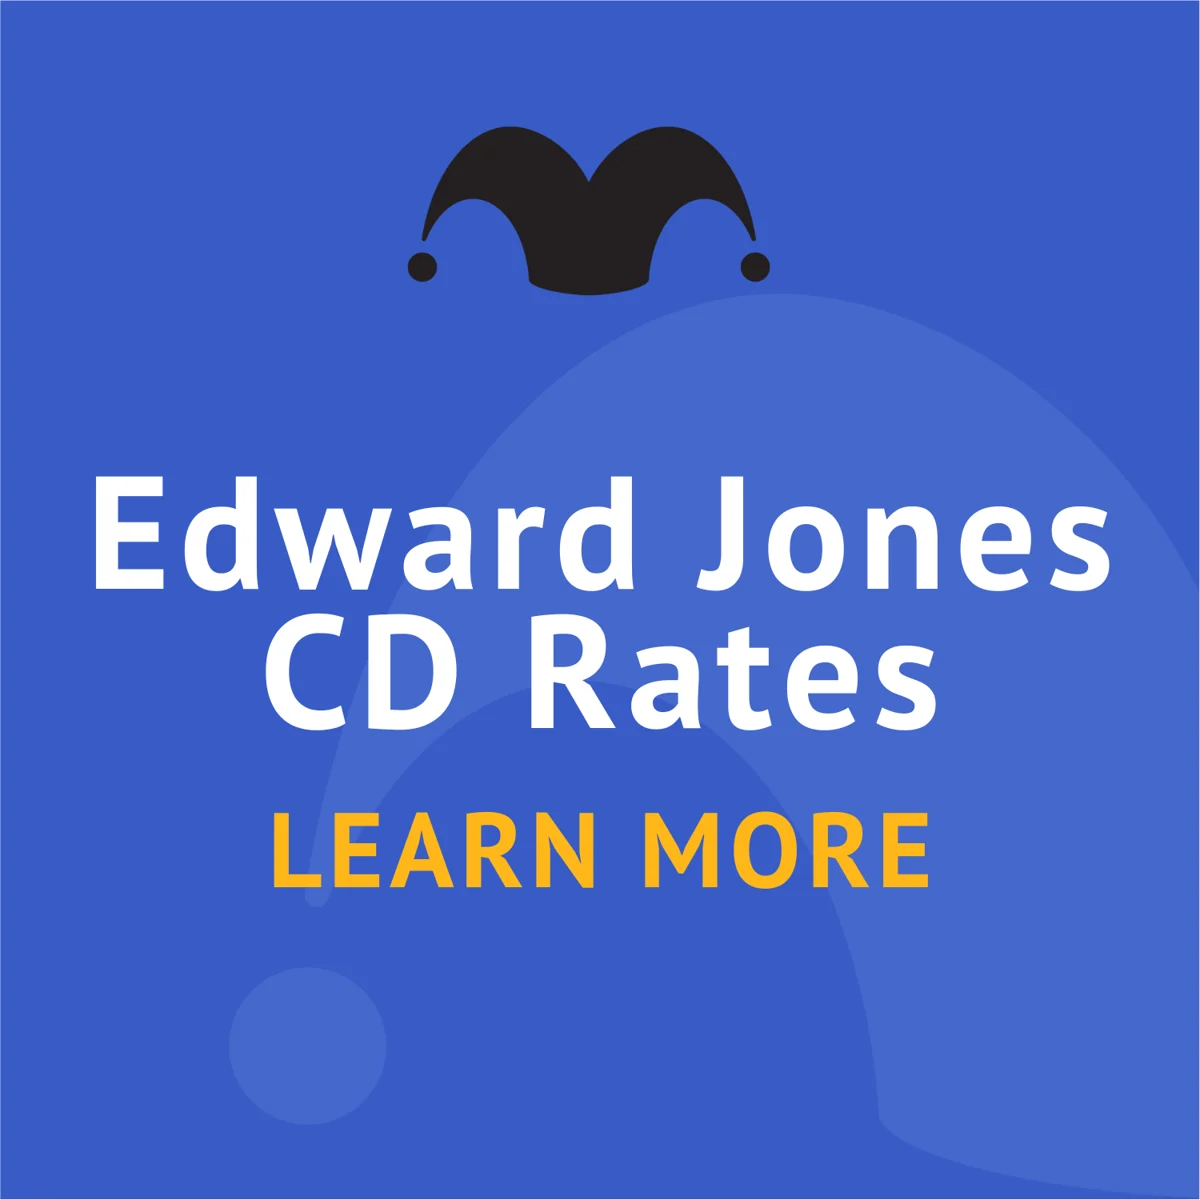 How to use the Edward Jones cd rates effectively